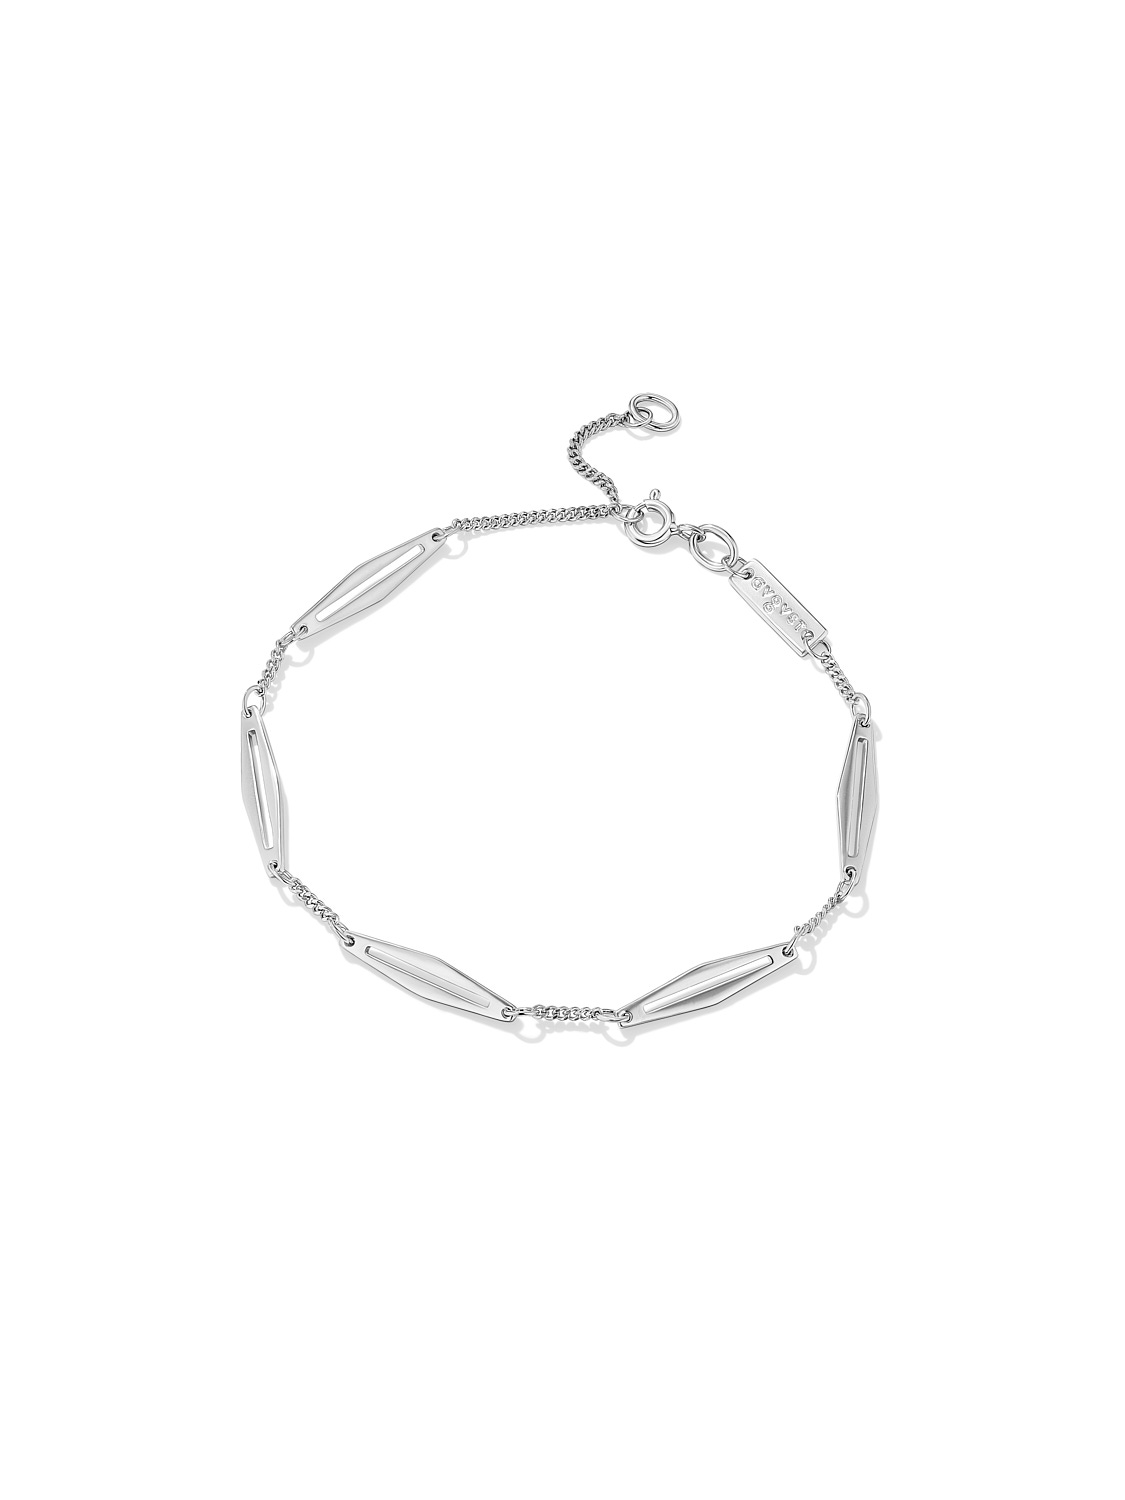 CHAIN OF EVENTS BRACELET